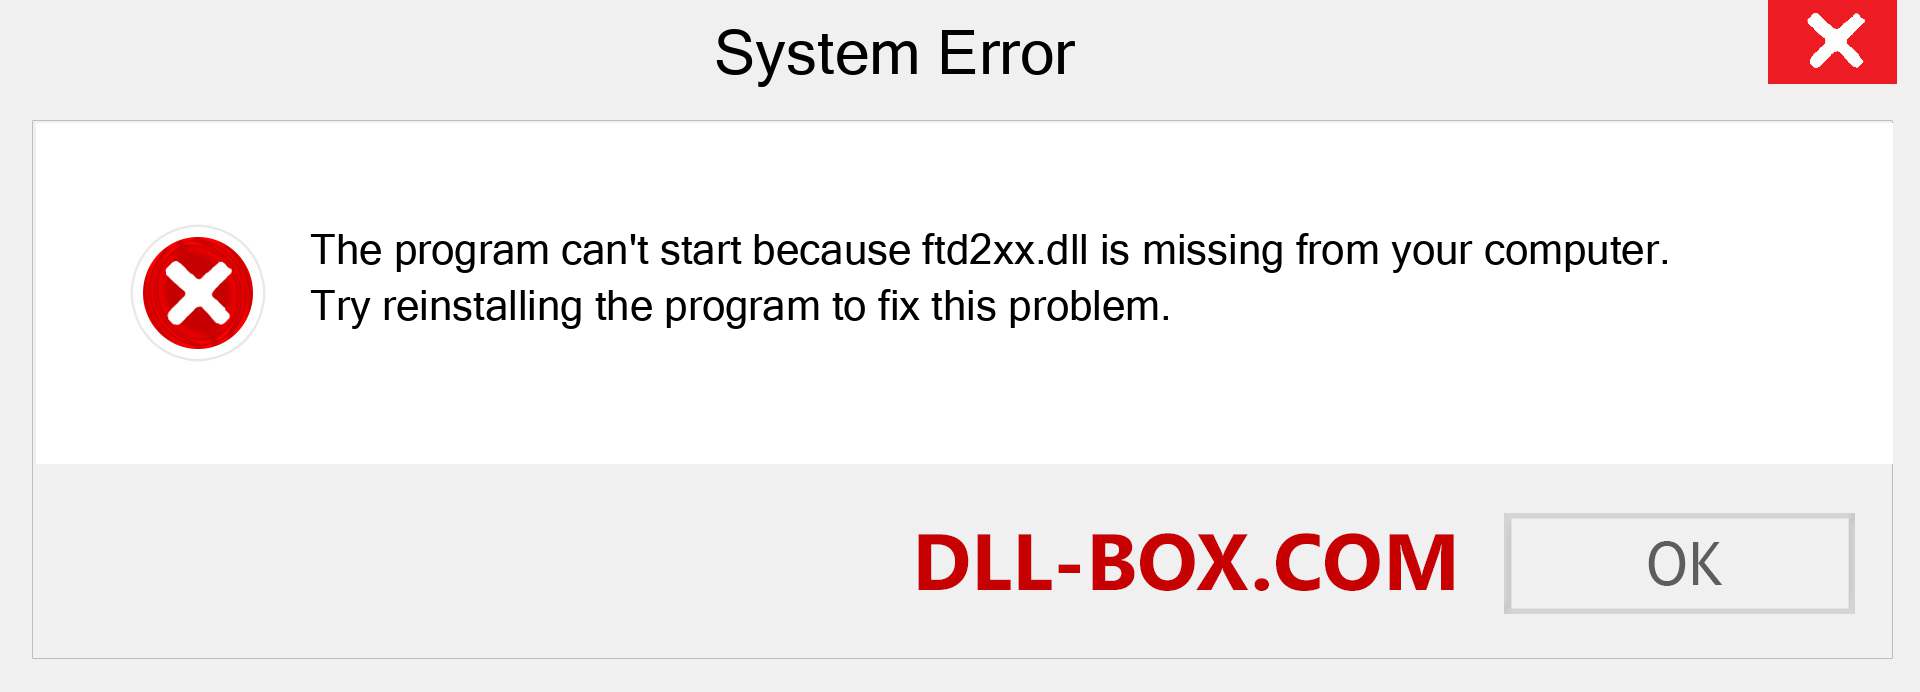  ftd2xx.dll file is missing?. Download for Windows 7, 8, 10 - Fix  ftd2xx dll Missing Error on Windows, photos, images